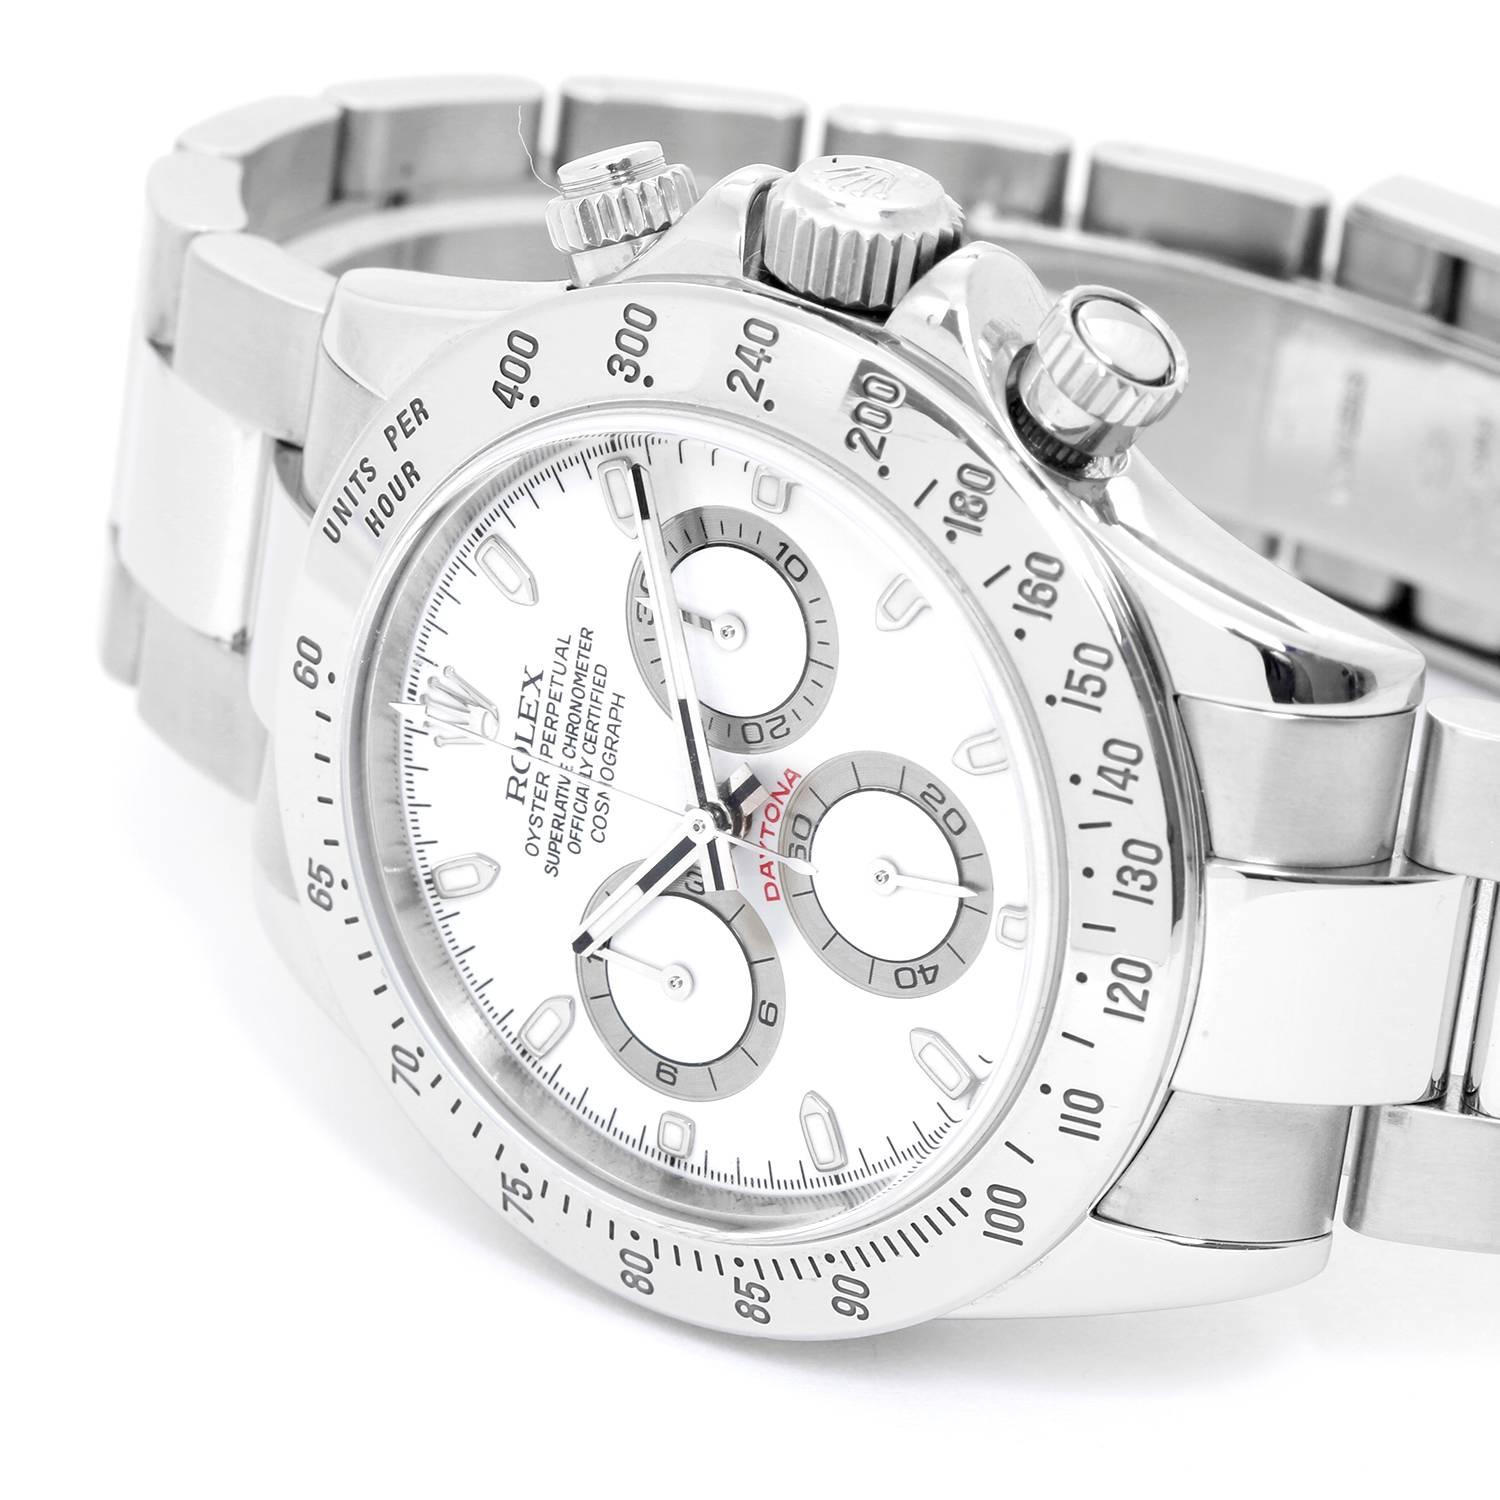 Rolex Daytona Men's Stainless Steel Chronograph Watch 116520 -  Automatic winding, chronograph, 44 jewels, sapphire crystal. Stainless steel case (40mm diameter). White dial with luminuous hour markers. Stainless steel Oyster bracelet with flip-lock